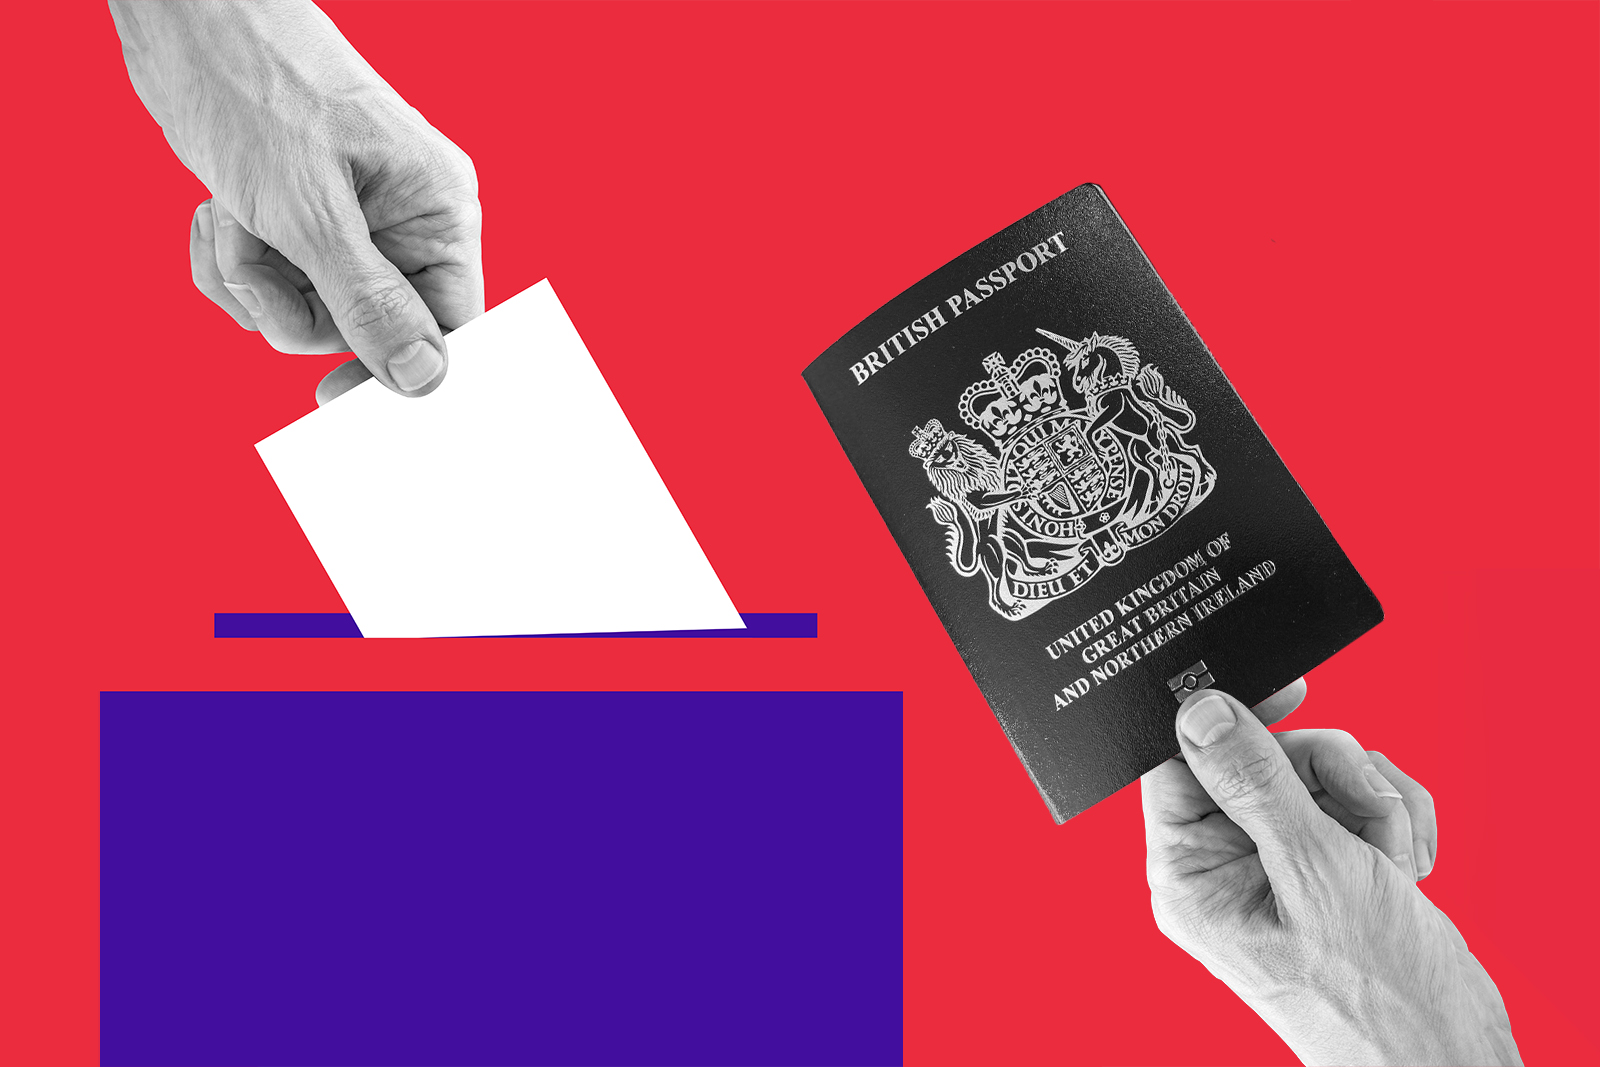 UK local elections voter ID requirements